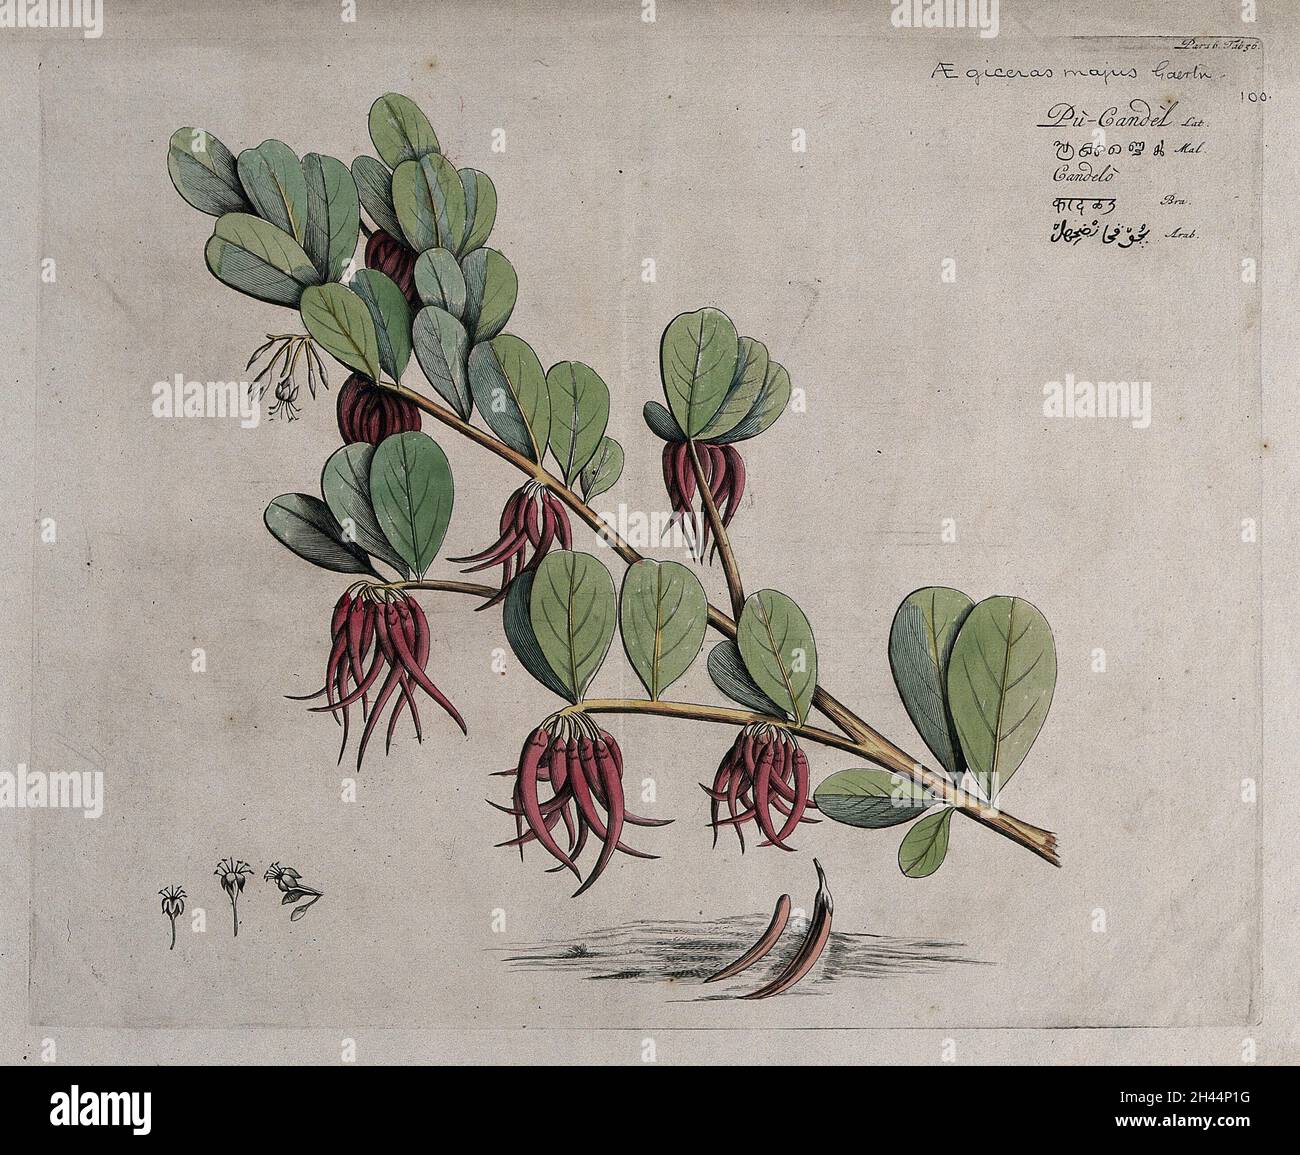 Mangrove plant (Aegiceras corniculatum (L.) Blanco): branch with flowers and fruit and separate flowers and fruit on ground. Coloured line engraving. Stock Photo